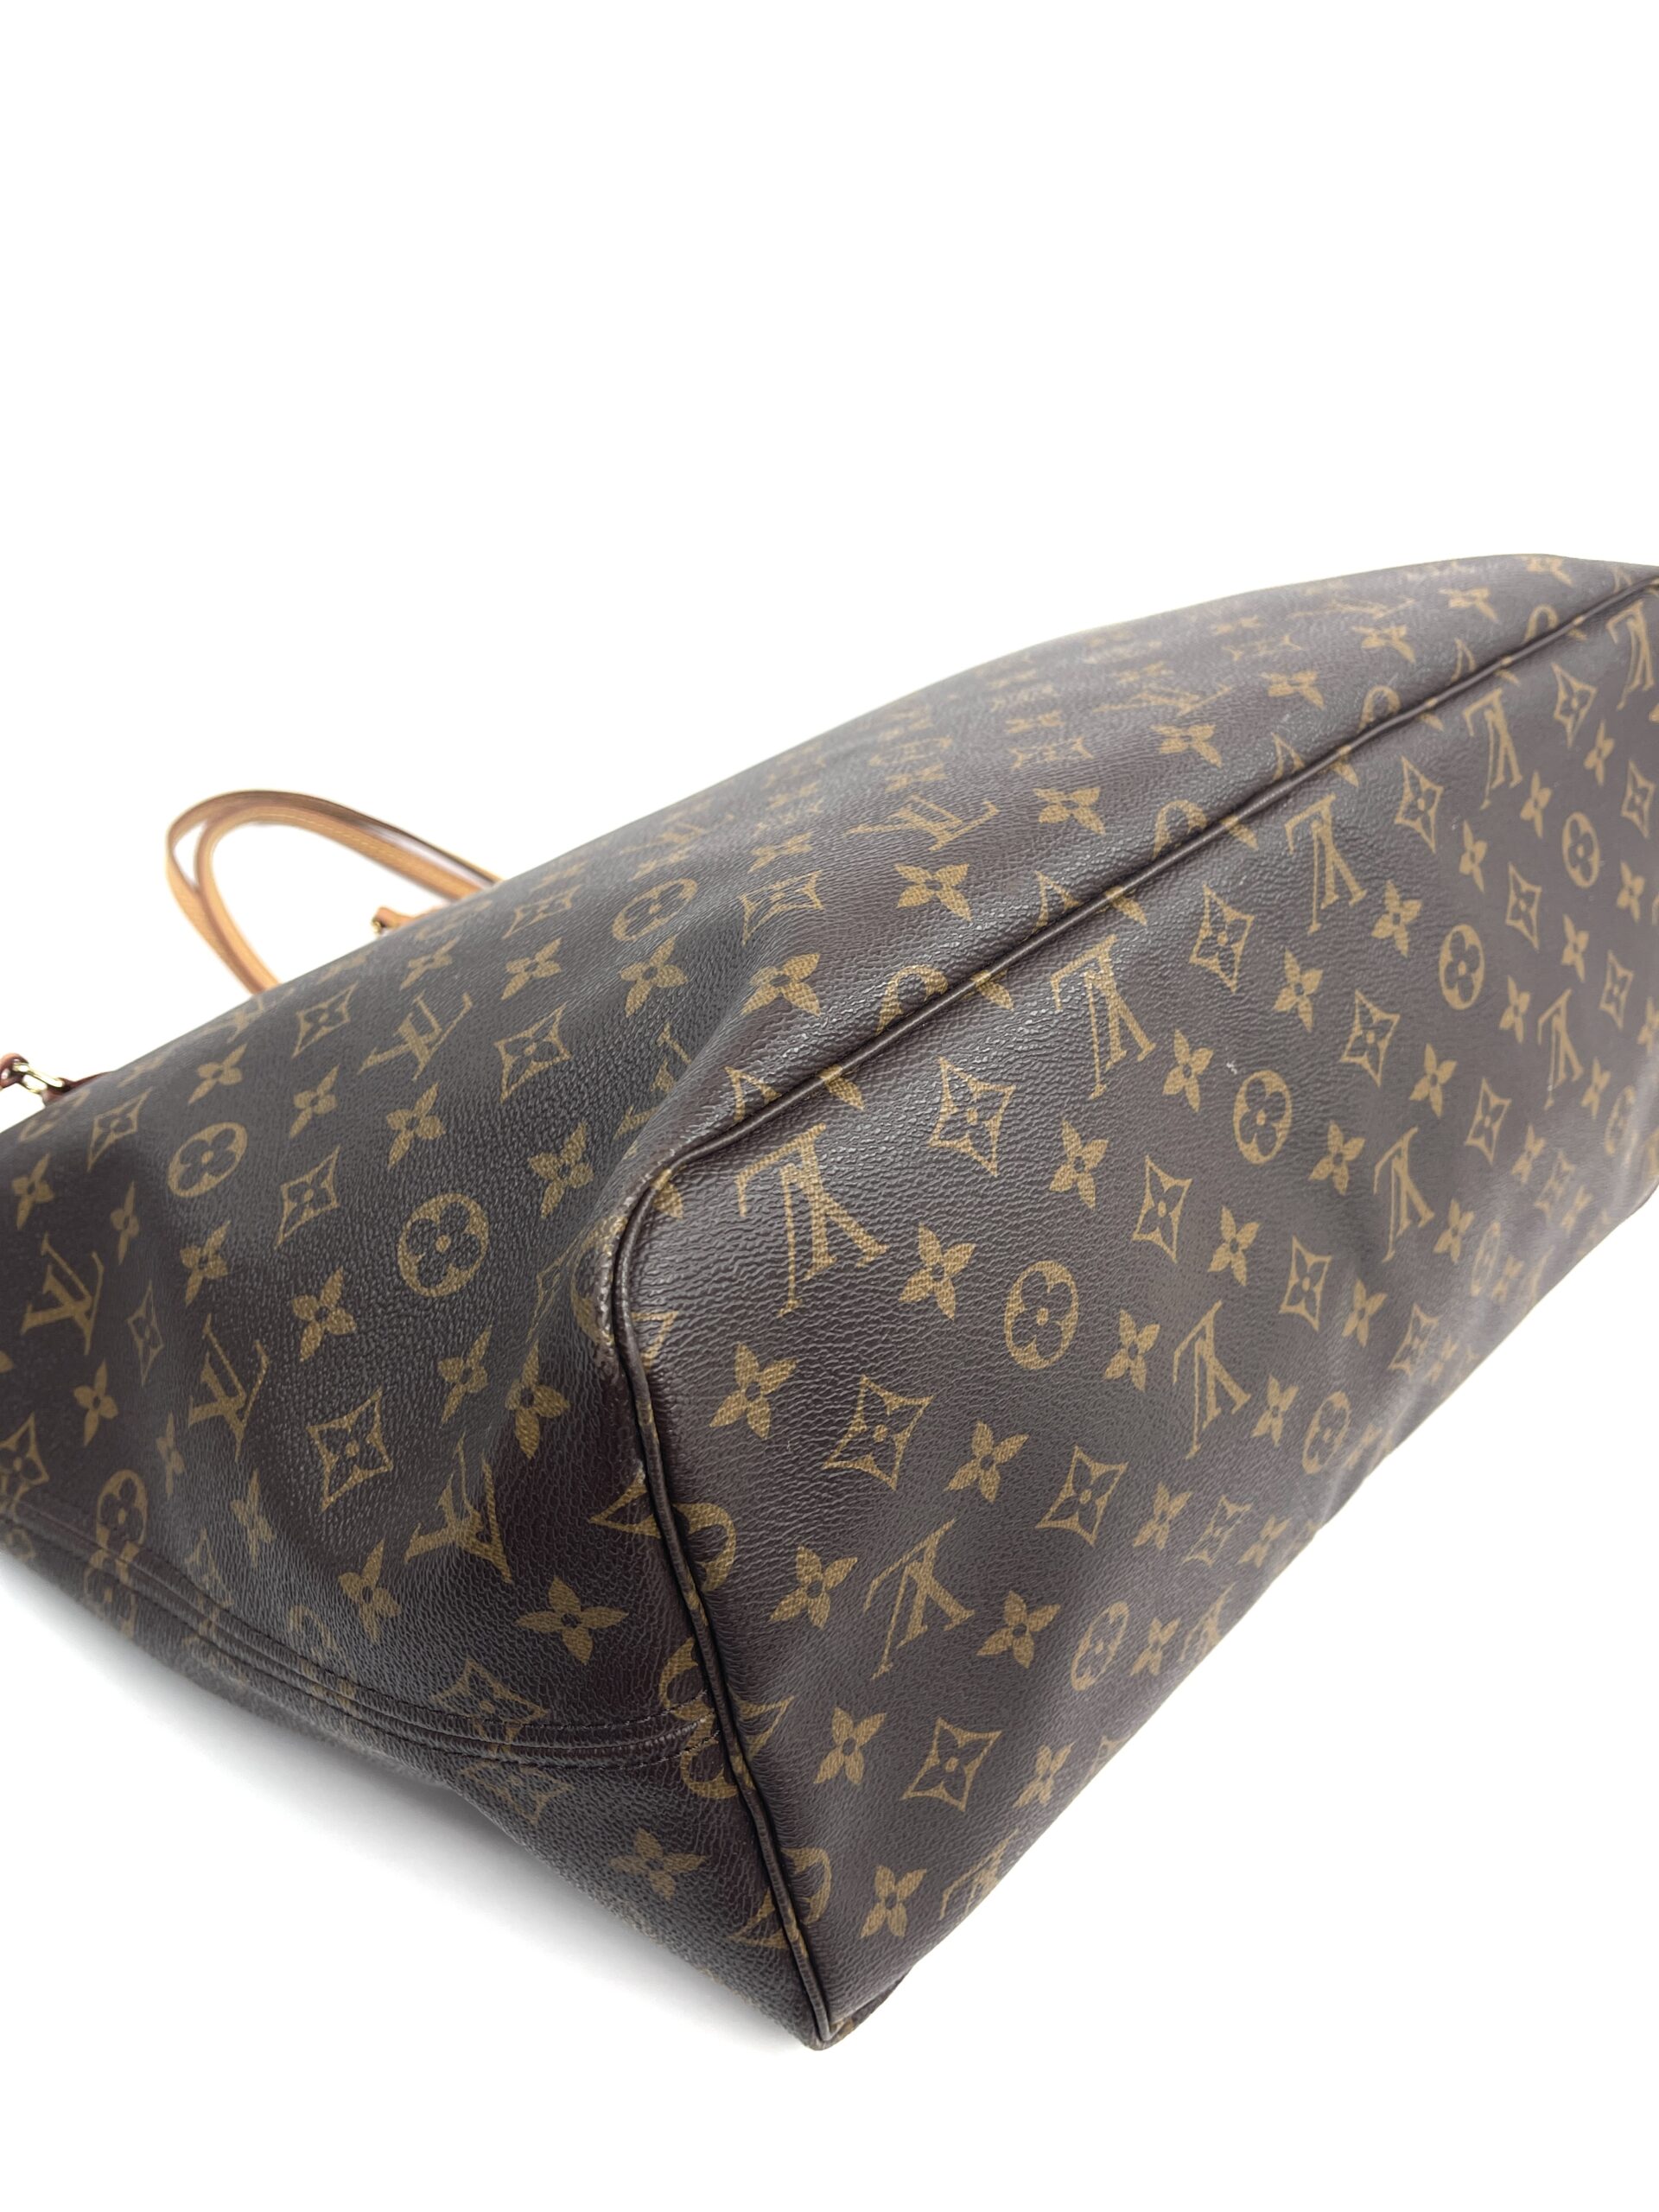 Louis Vuitton lv neverfull monogram with black trimming handles